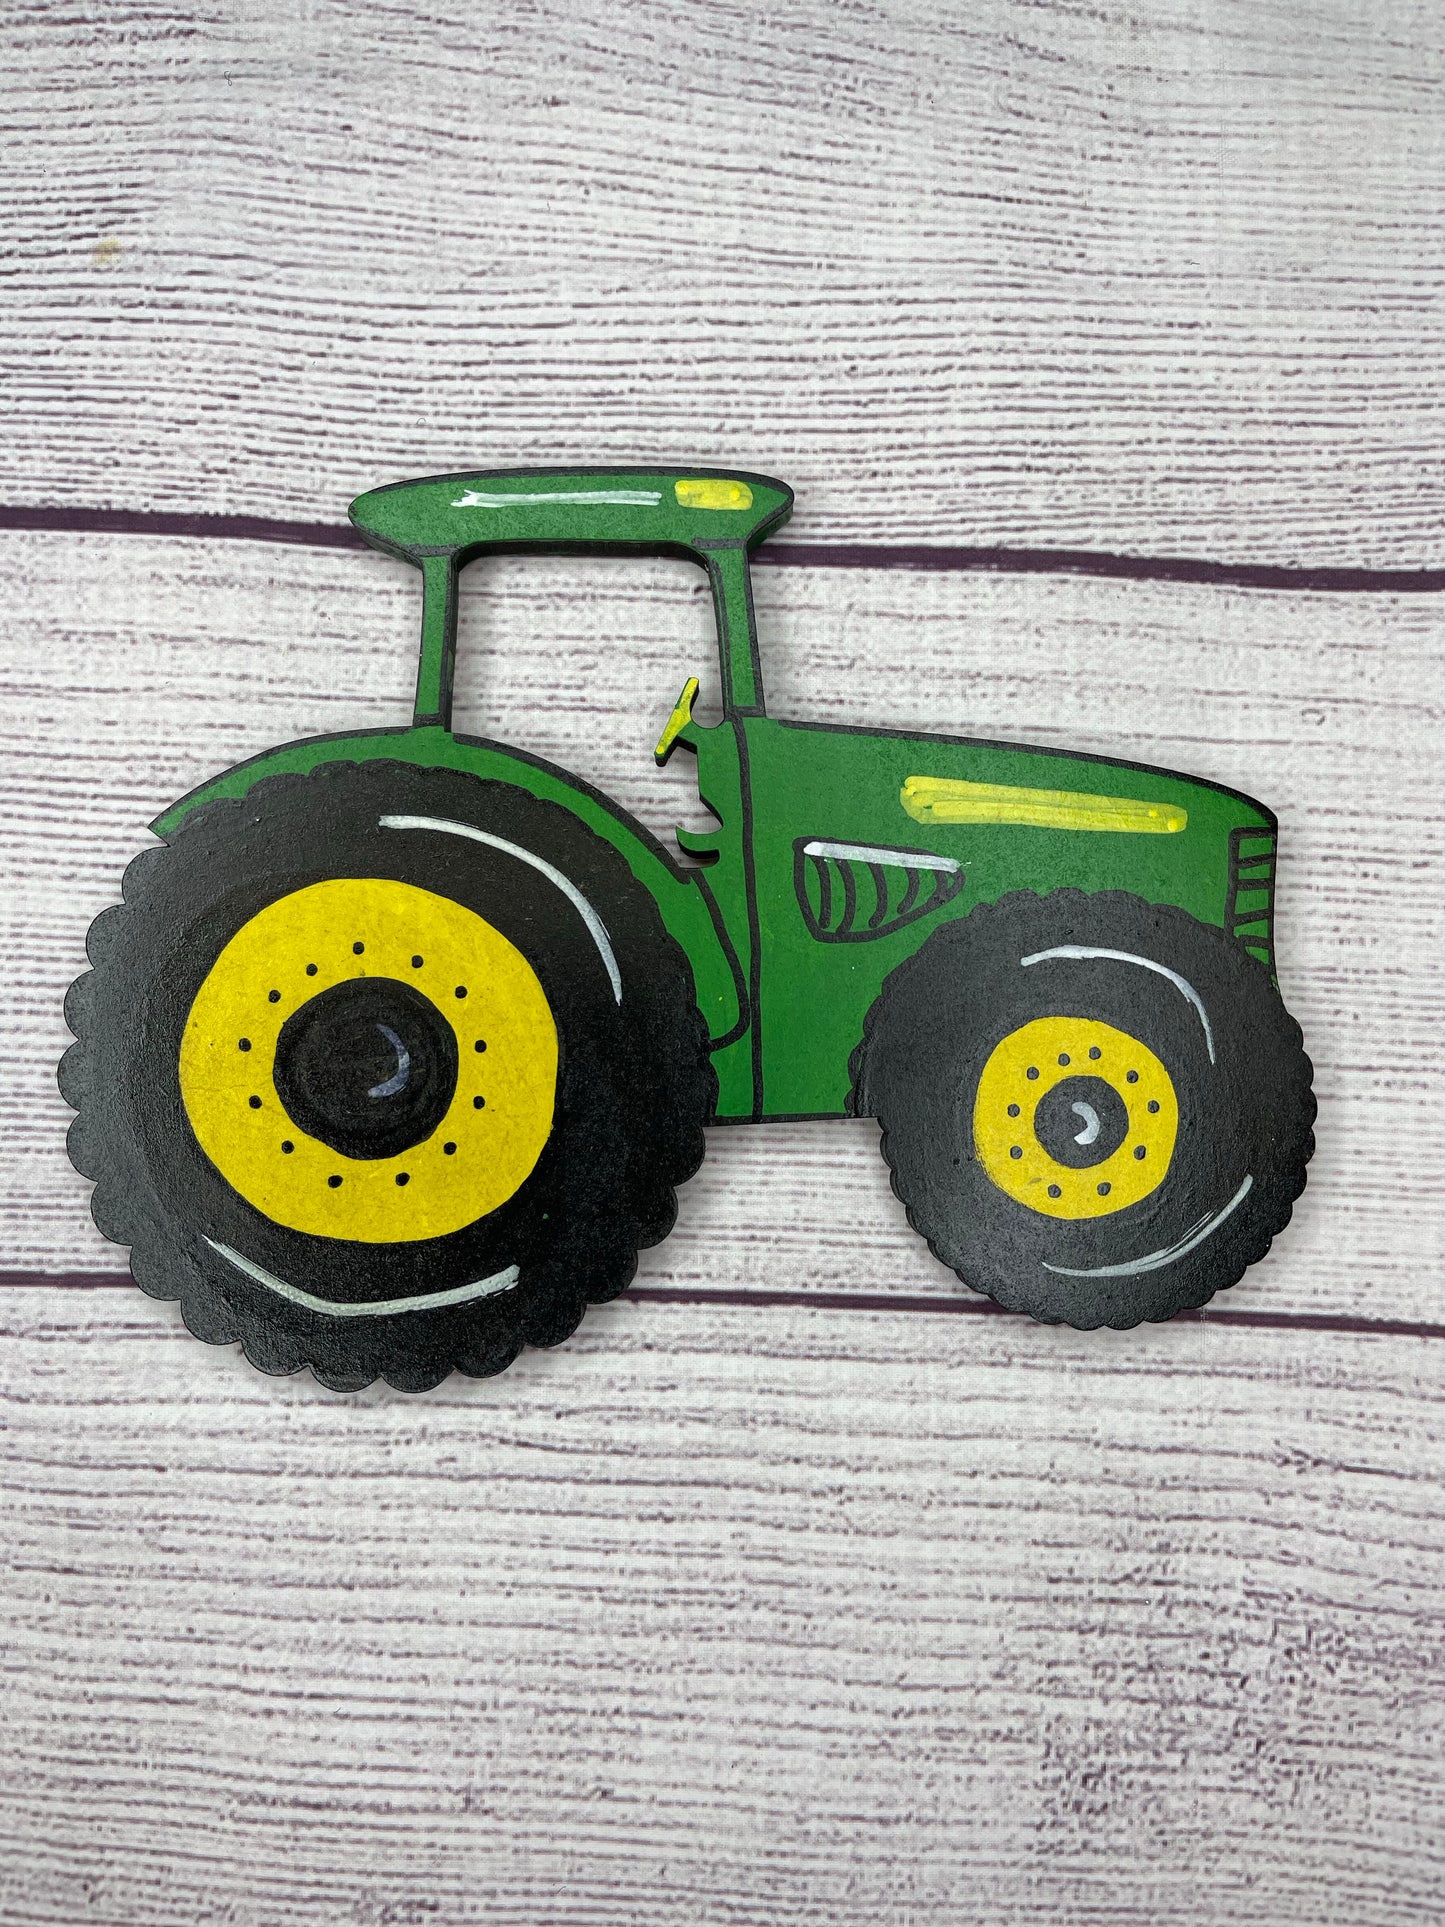 Green Tractor Interchangeable Attachment